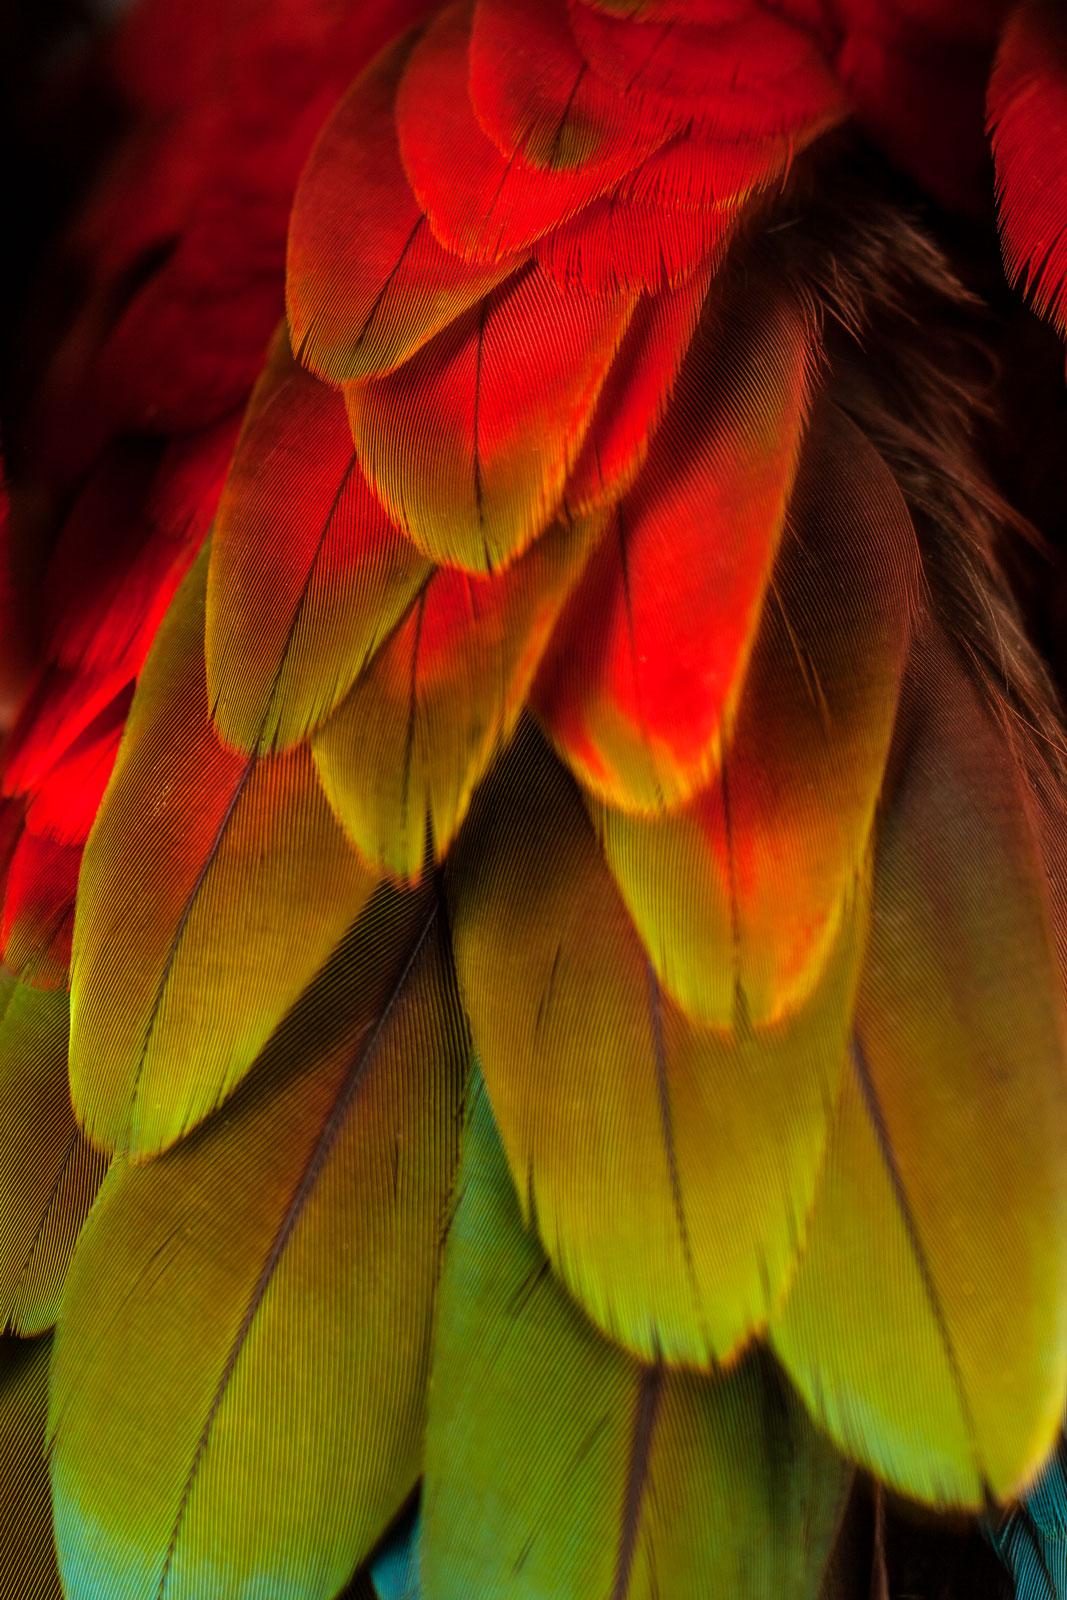 Macaw #5  -  Signed limited edition archival pigment print  -  Edition of 3

The iridescent feathers of a Green-Winged Macaw. The feathers of the middle wing transition from red to yellow and green with blue tips.

Animal photography is about being